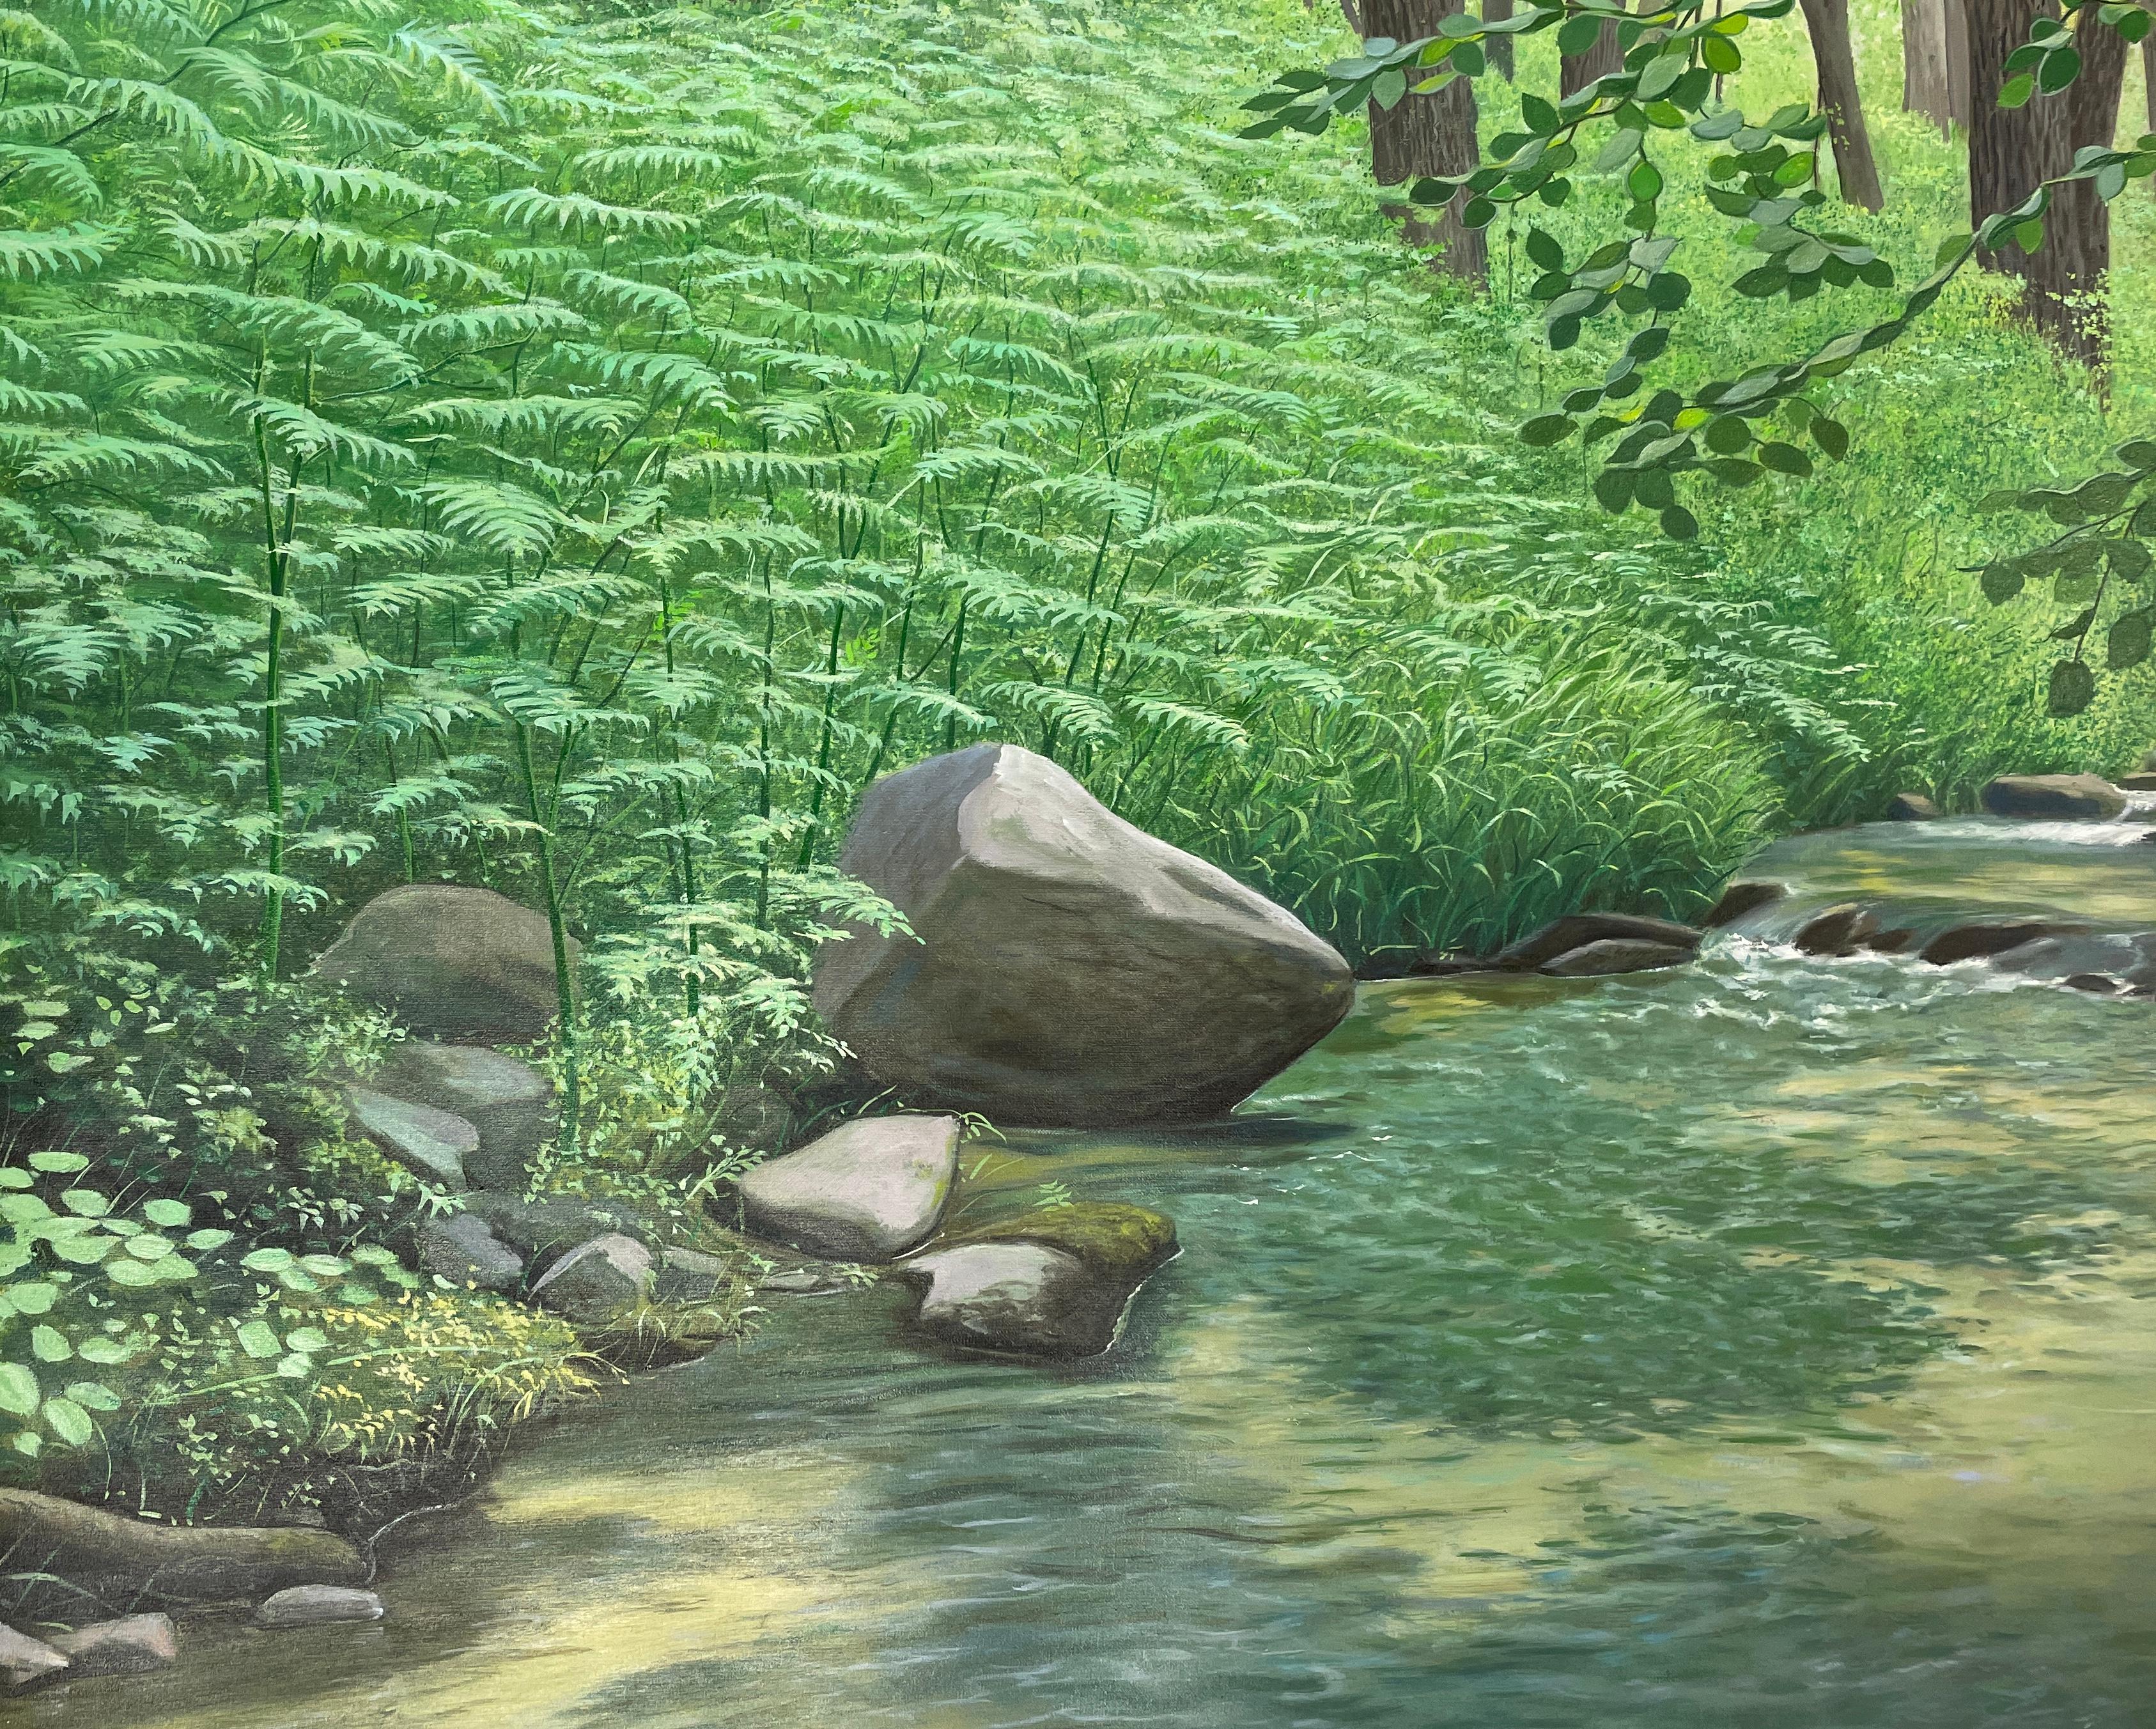 The River With No Name-Highly Detailed Lush Wooded Landscape with Babbling Brook - Painting by René Monzón Relova “Pozas”